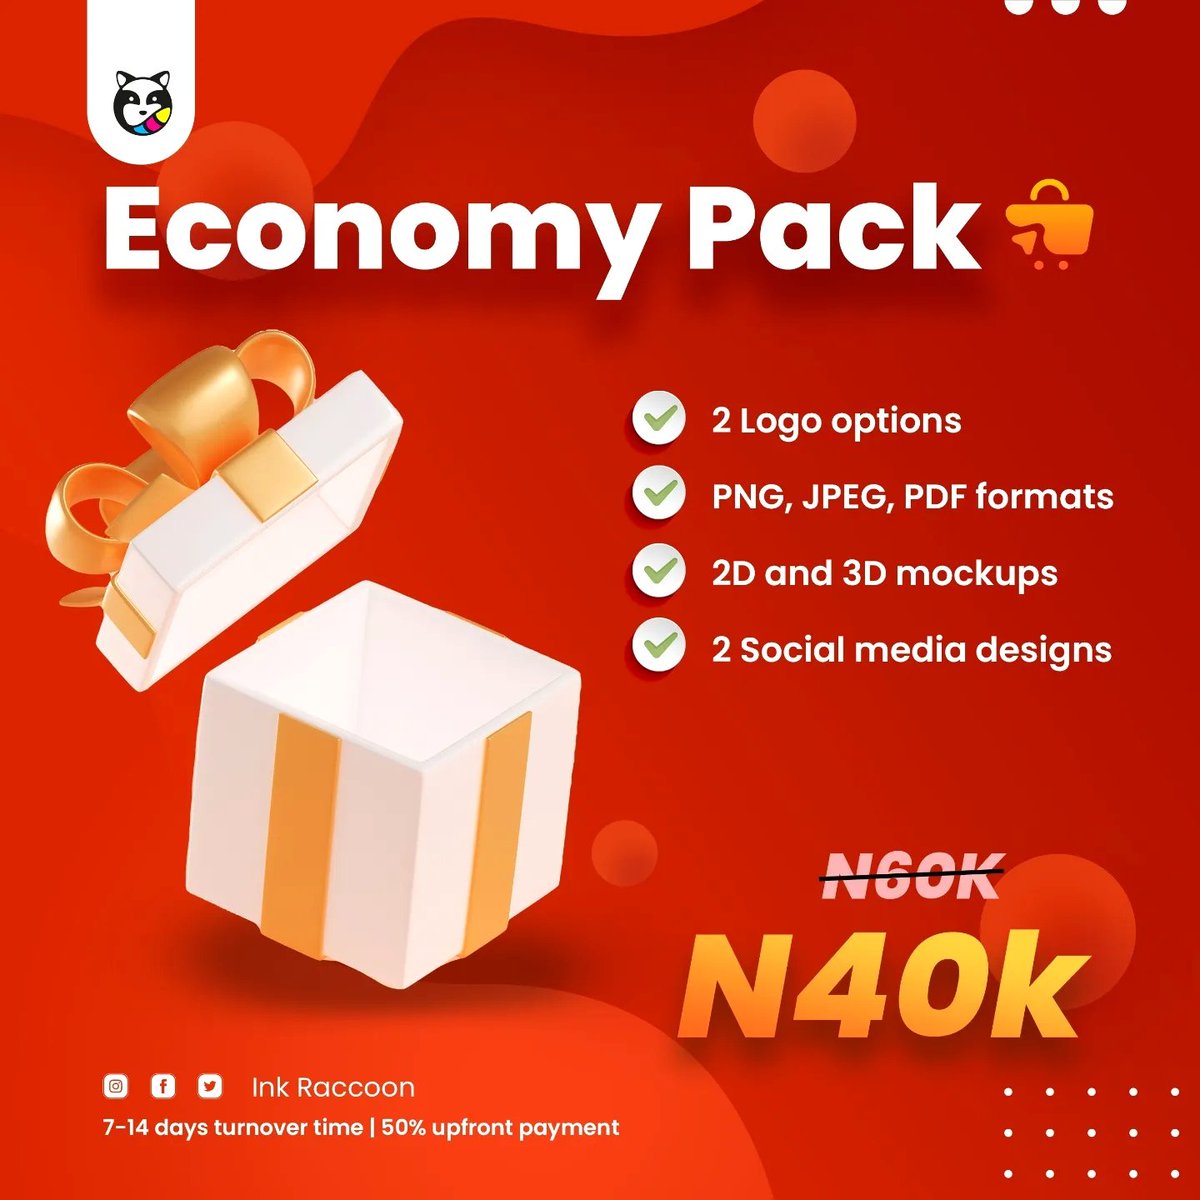 WHAT YOU GET:
💡2 Logo options
💡PNG, JPEG and PDF formats
💡2D and 3D mock-ups
💡2 Social media post designs
Do not let this slide. Grab it while it lasts.
(2/2)
#nigerianbusiness #nigeria #lagos #naijabrandchick #lagosbusiness #lagosnigeria #abuja #nigerianfashion #TrendingNow